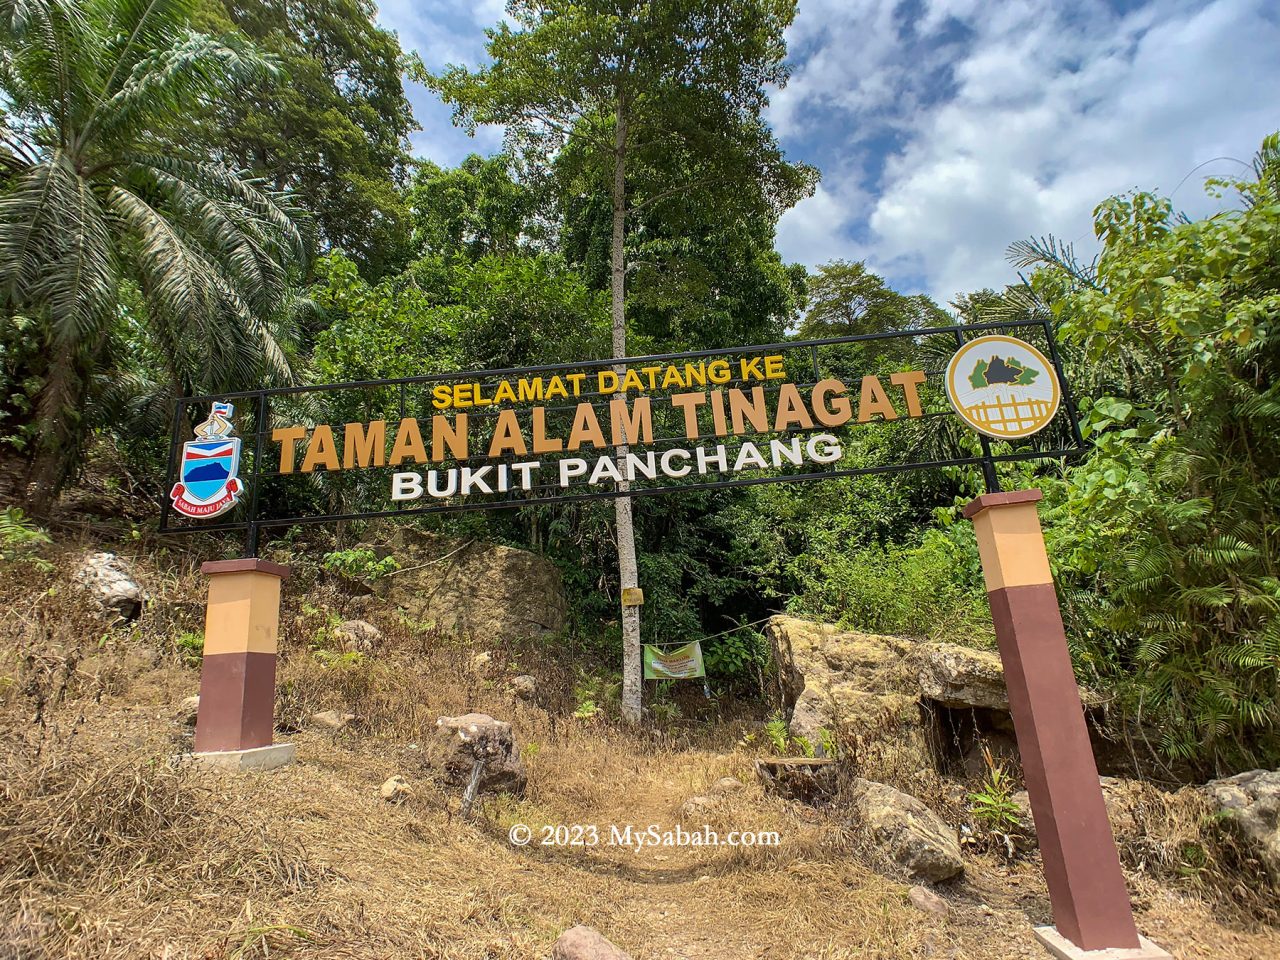 The starting point of the climb at the Sabah Forestry Department station